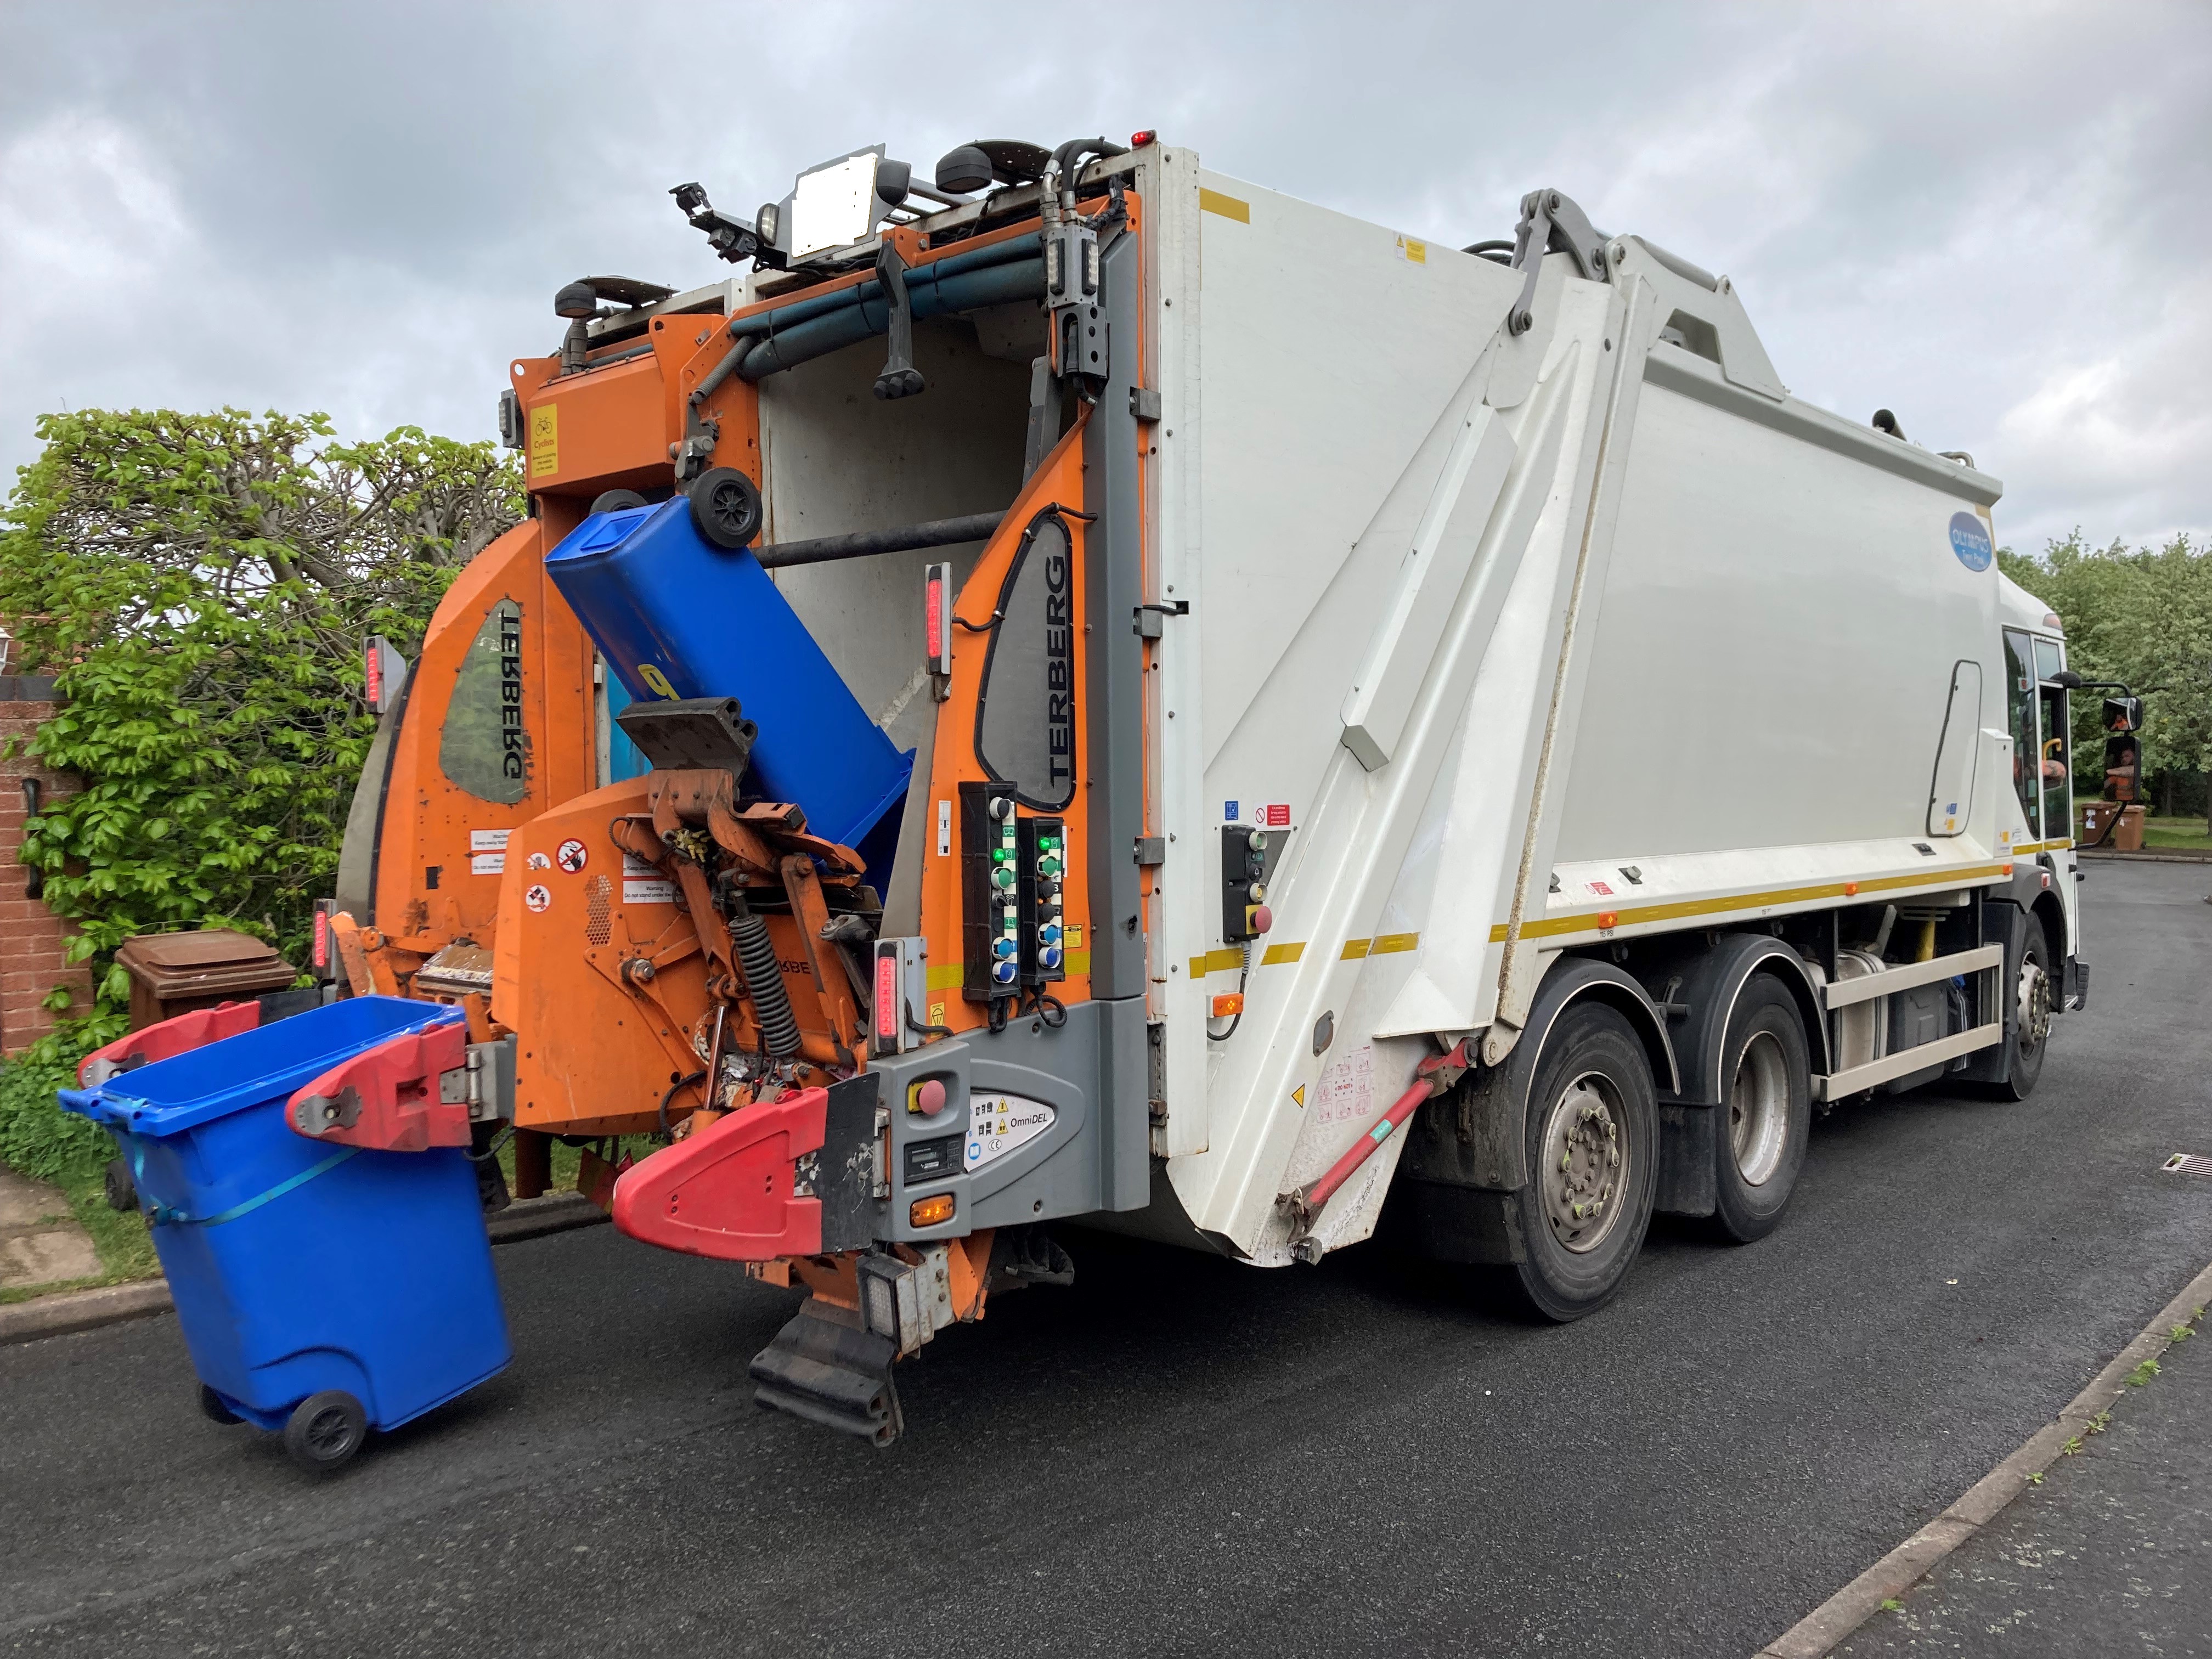 New fleet helps Lichfield and Tamworth improve quality of recycling collections